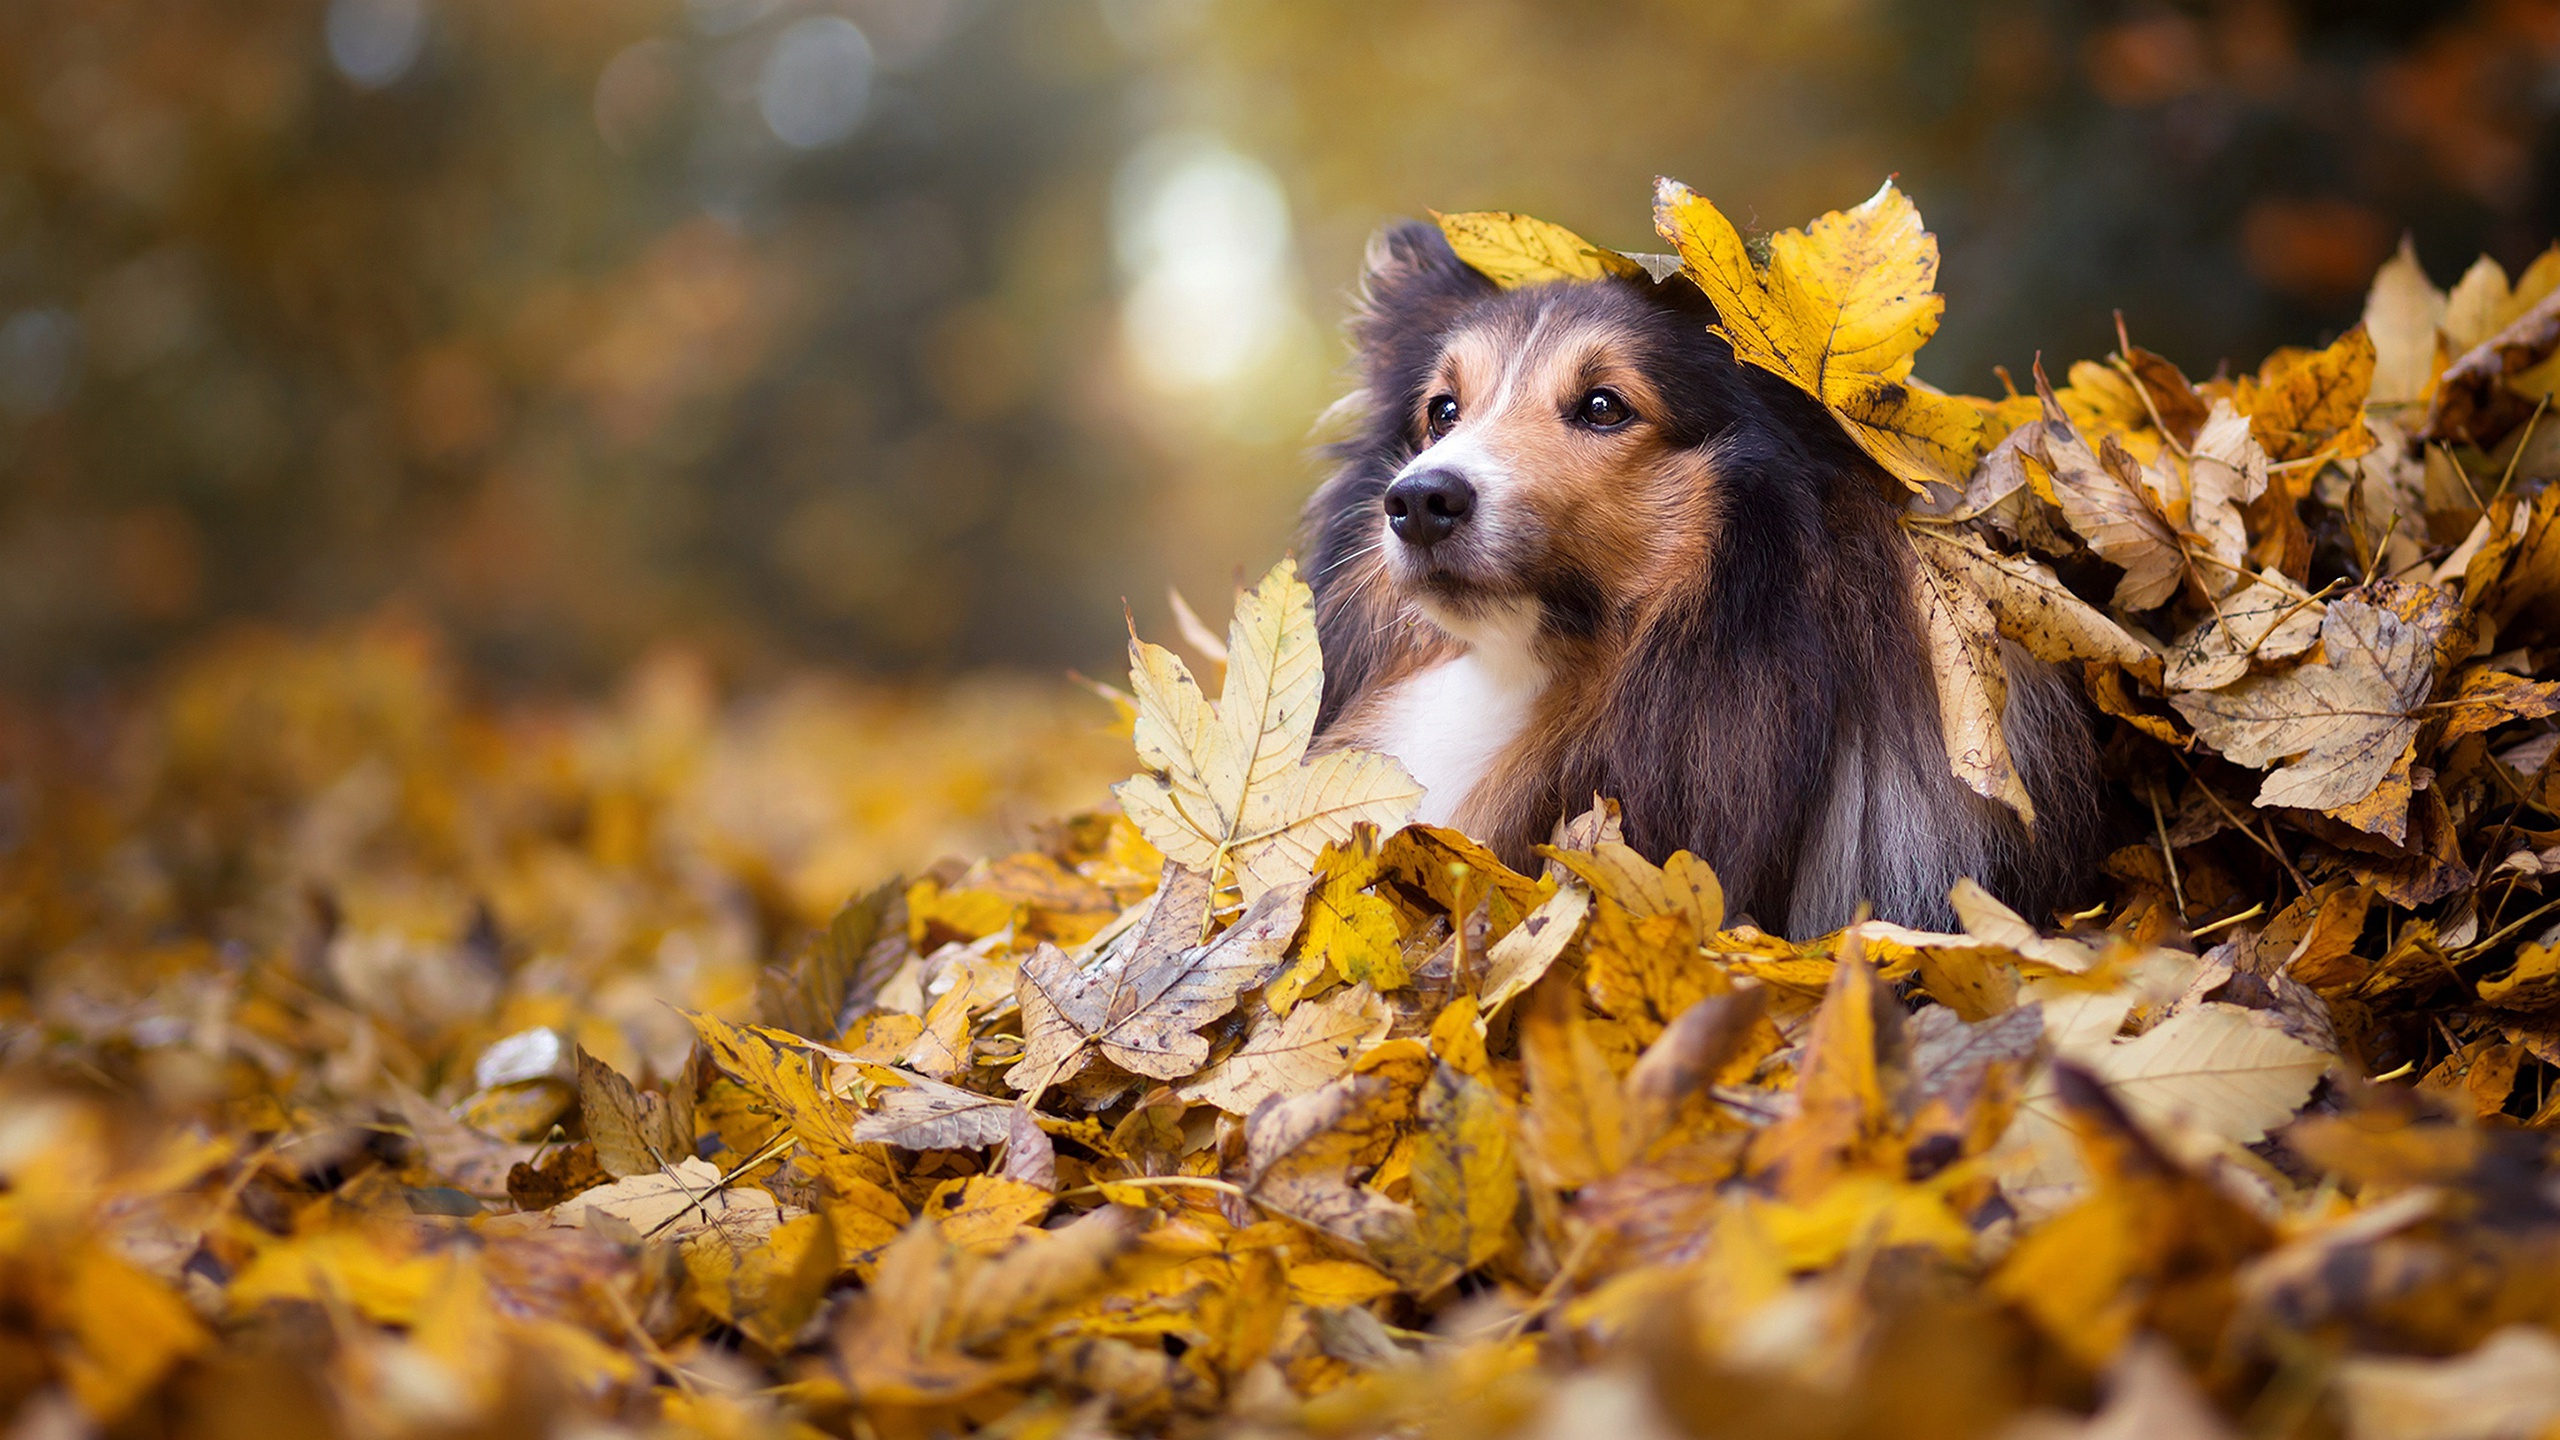 General 2560x1440 animals dog fall fallen leaves outdoors nature mammals looking away depth of field blurred blurry background leaves sunlight fur